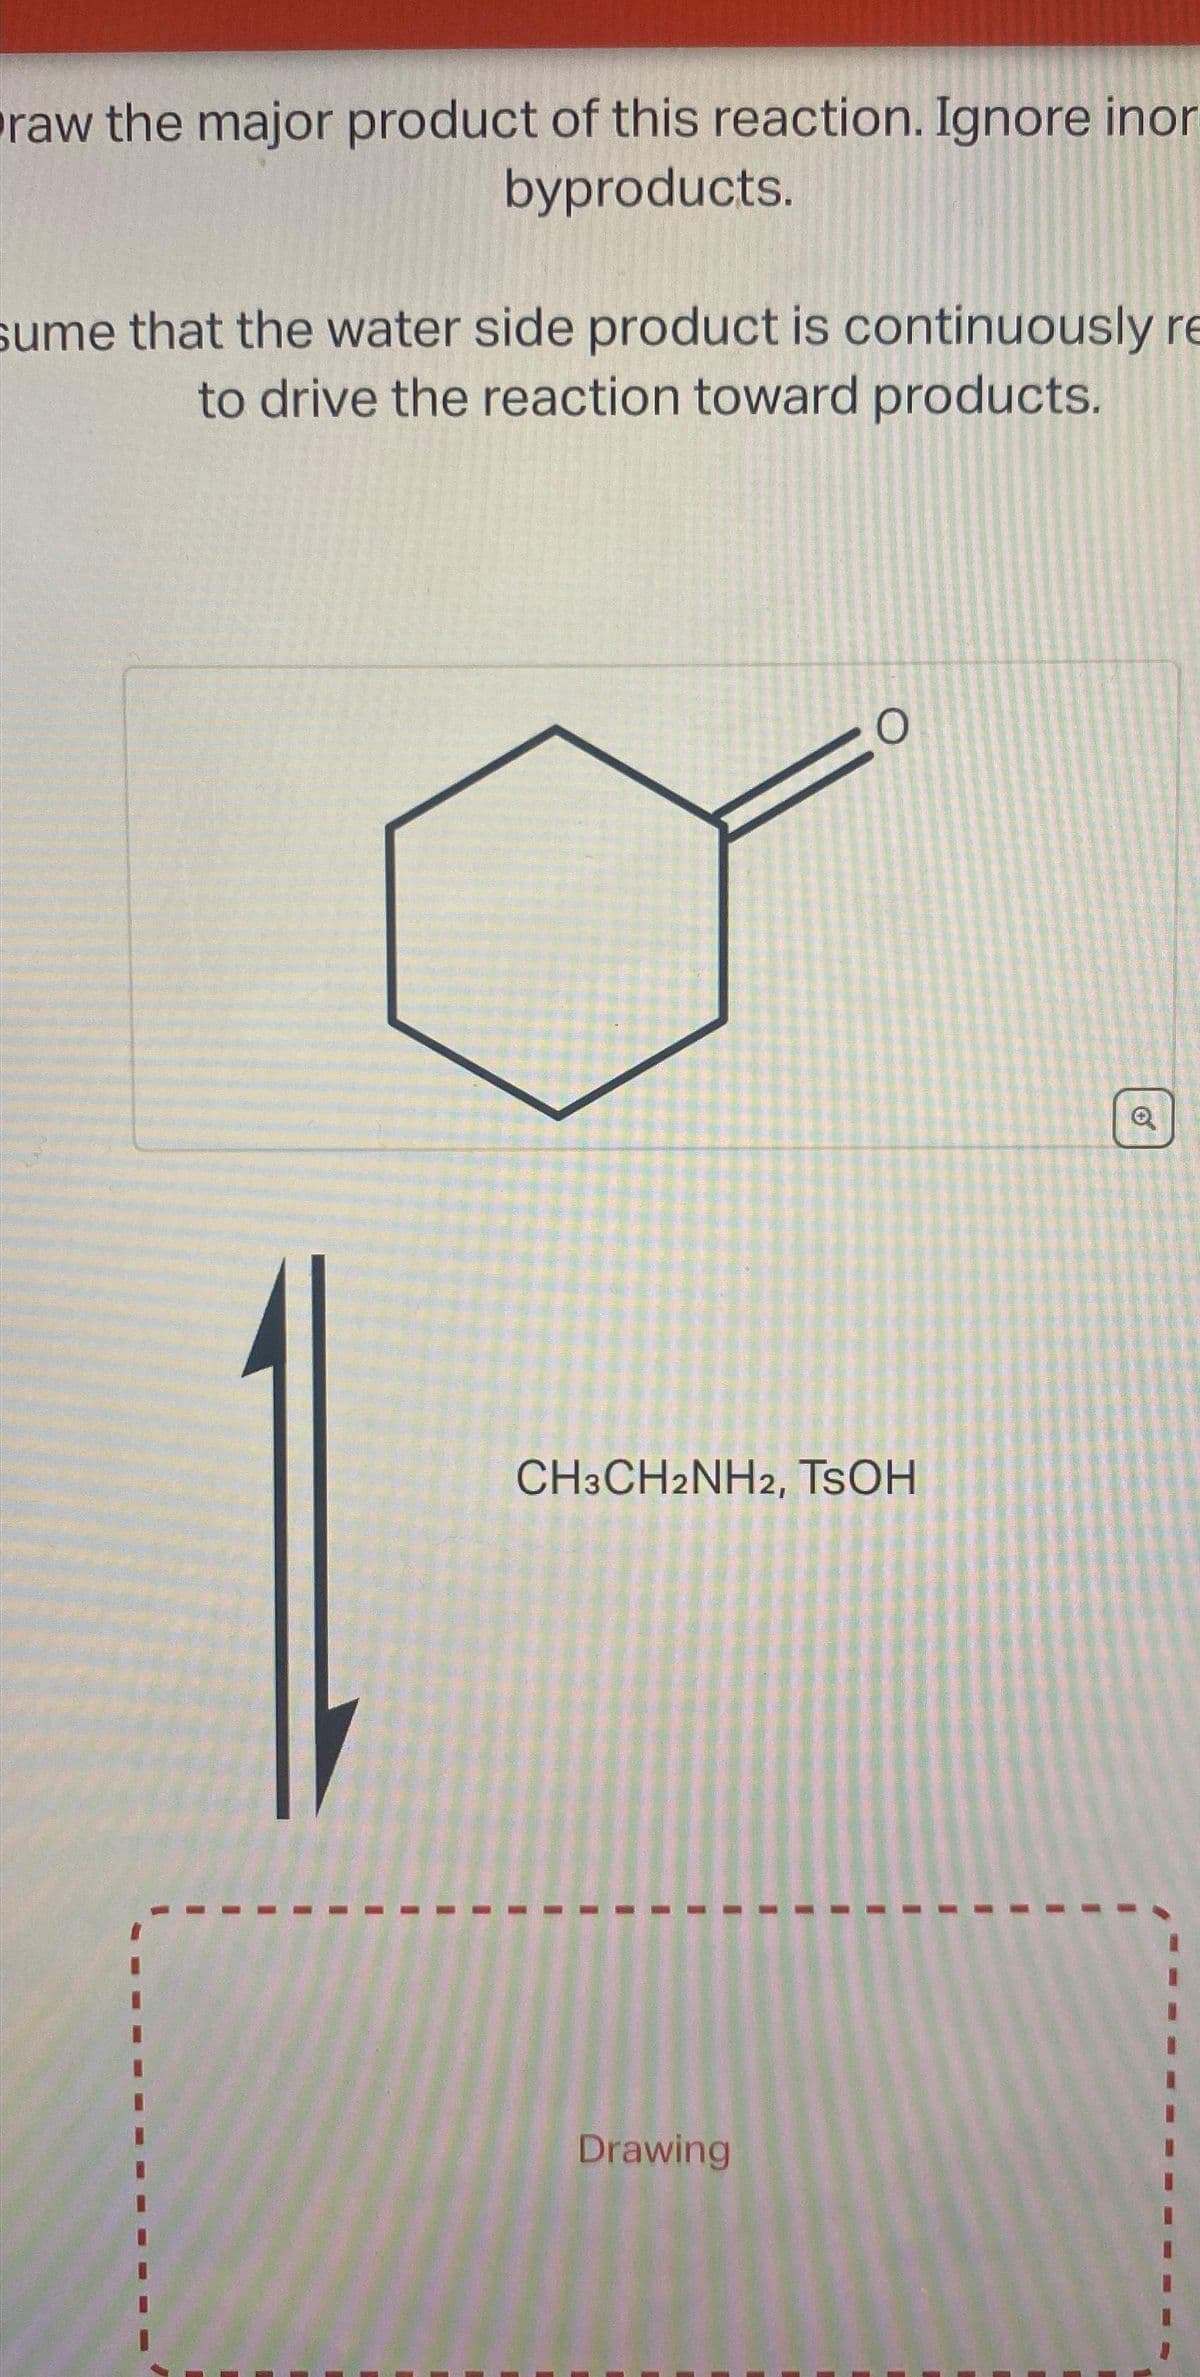 raw the major product of this reaction. Ignore inor
byproducts.
sume that the water side product is continuously re
to drive the reaction toward products.
O
CH3CH2NH2, TSOH
Drawing
O